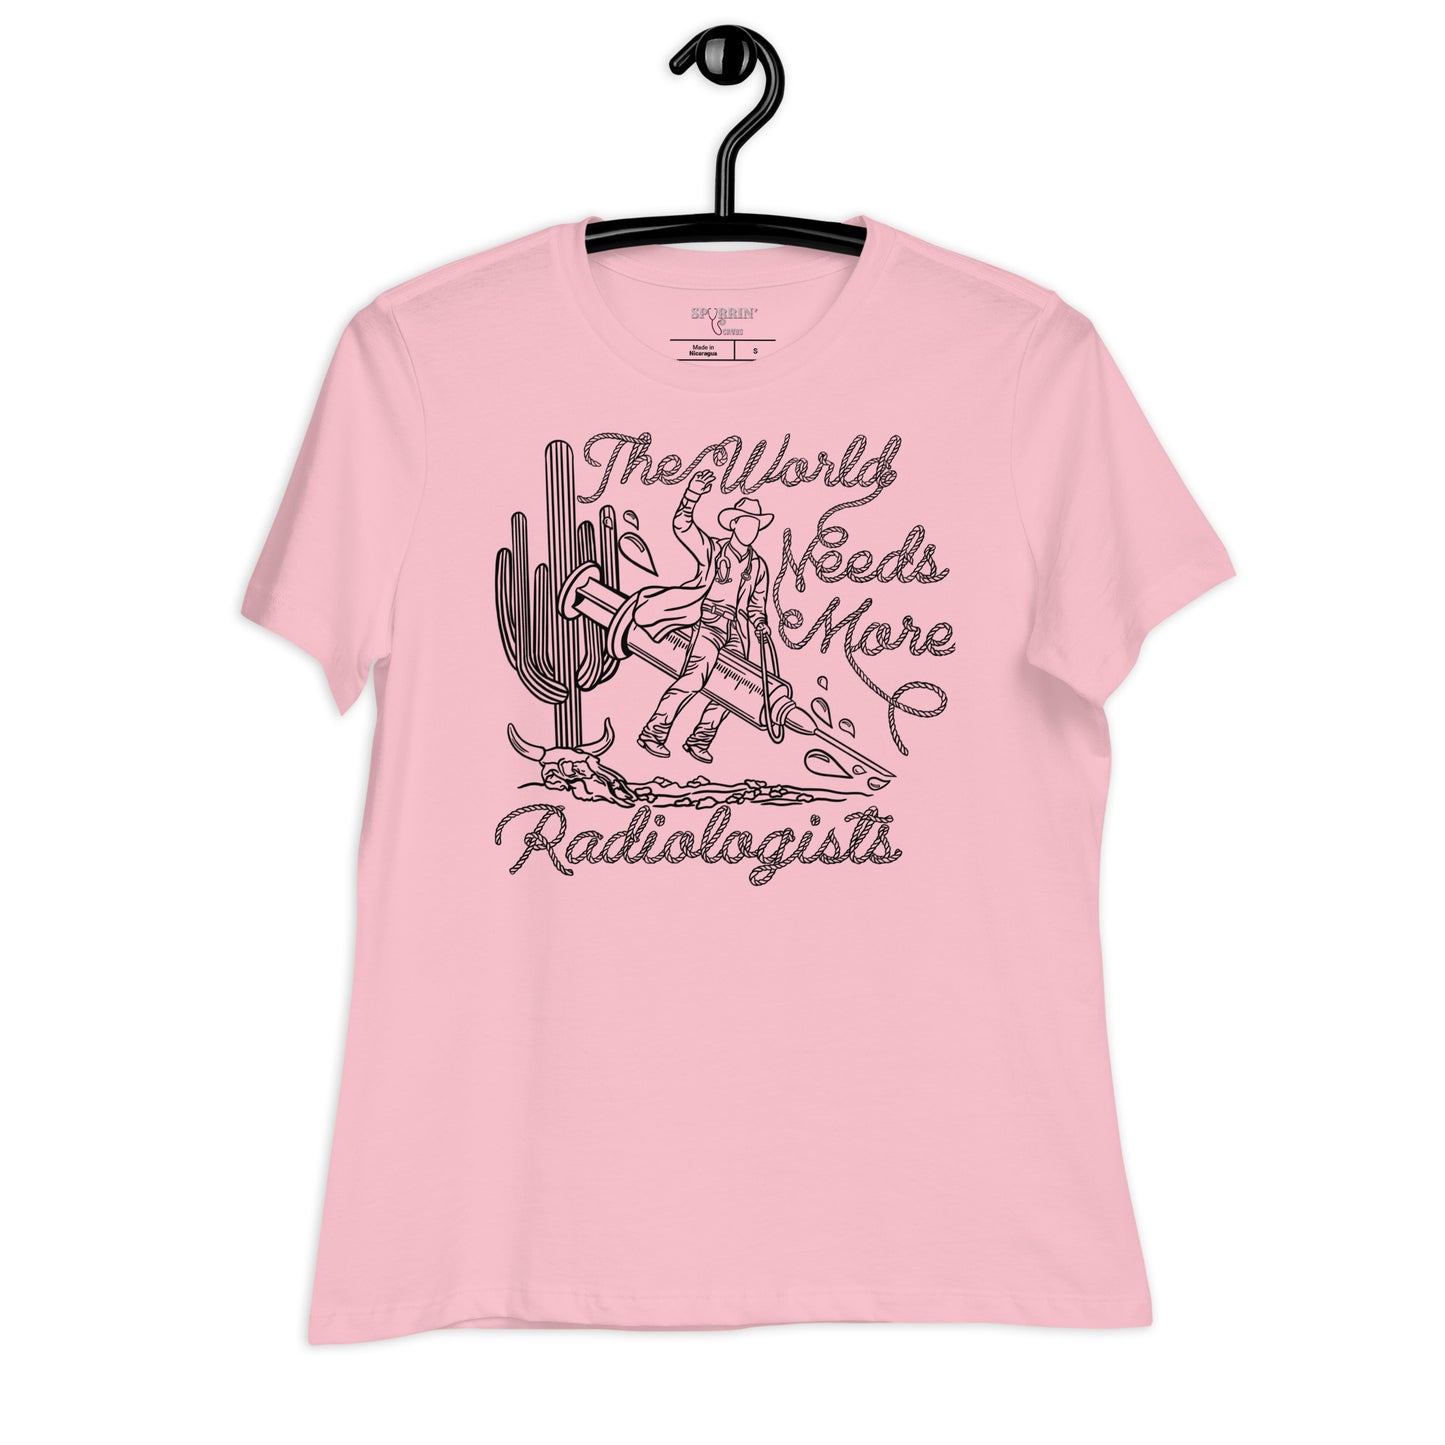 TWNM- Radiologists Relaxed T- Shirt Light Colors